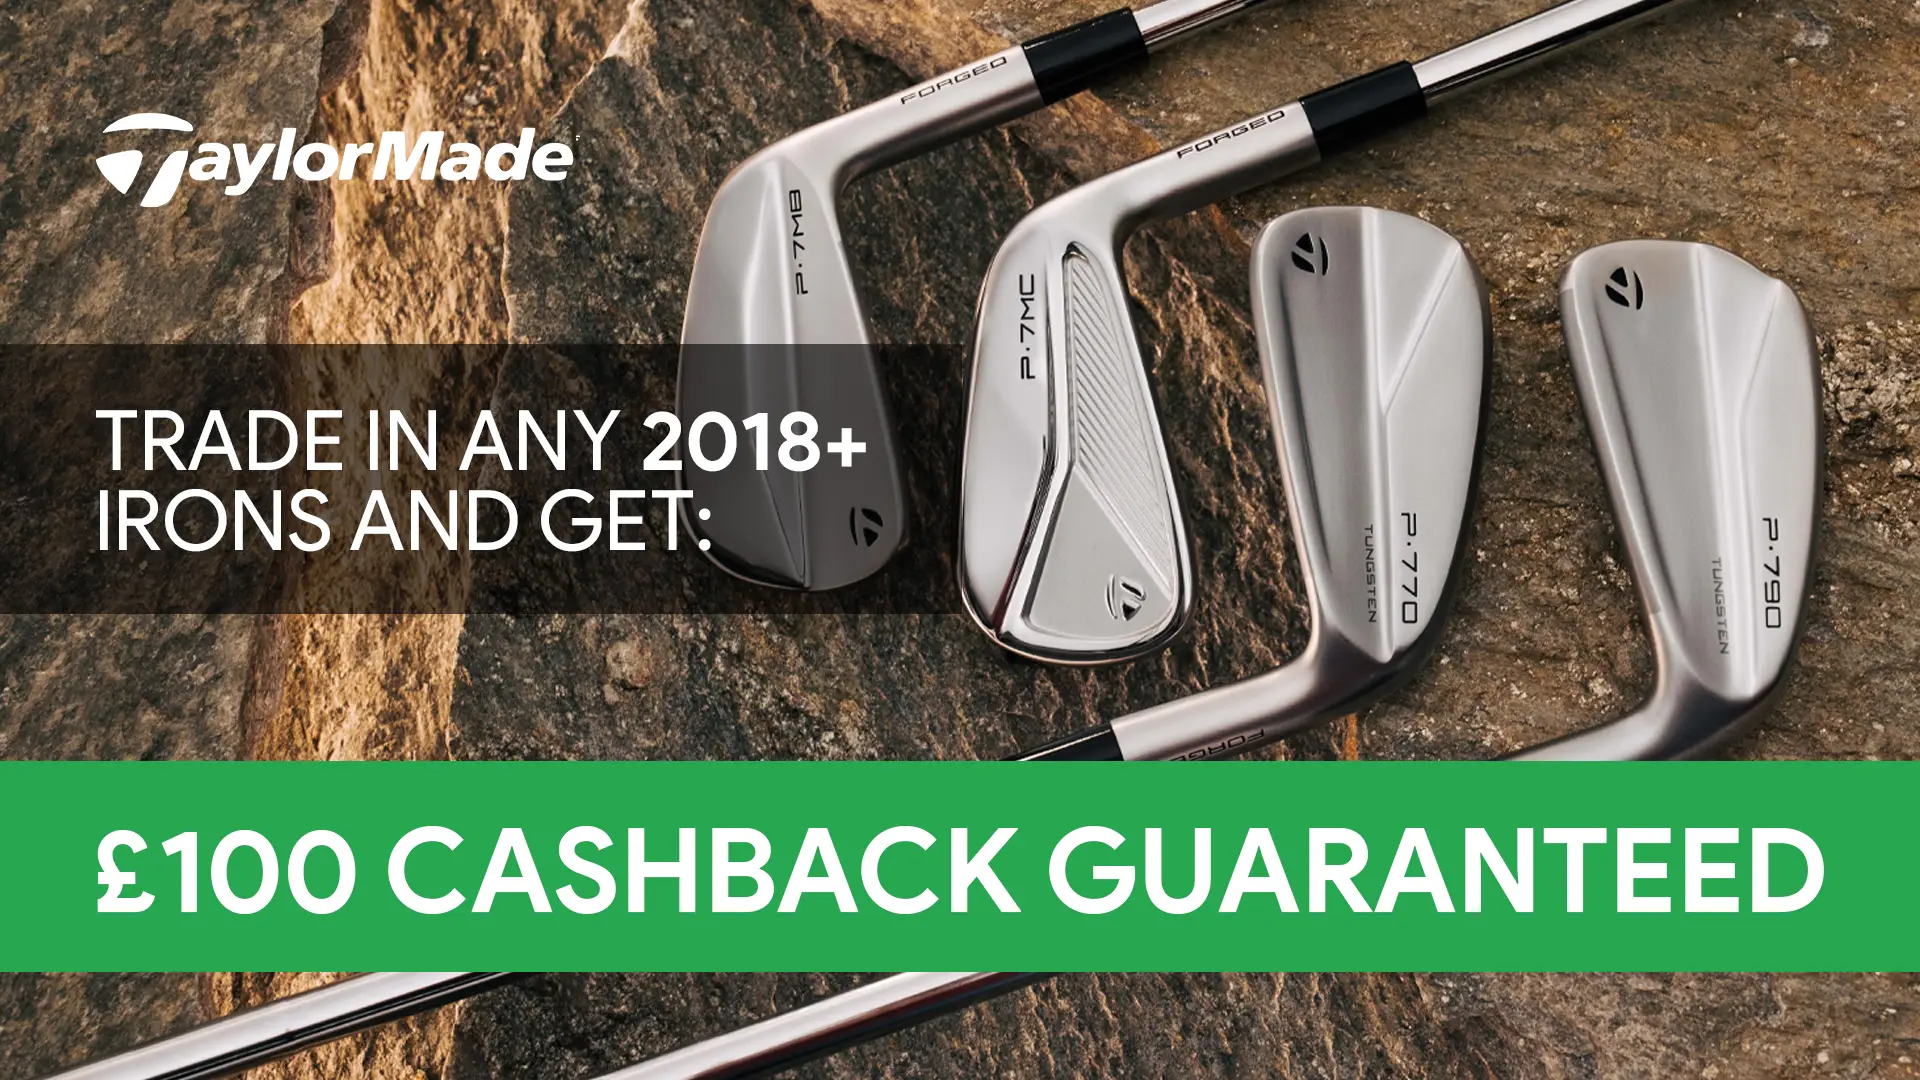 TaylorMade £50 cash back when you trade in any 2018+ irons